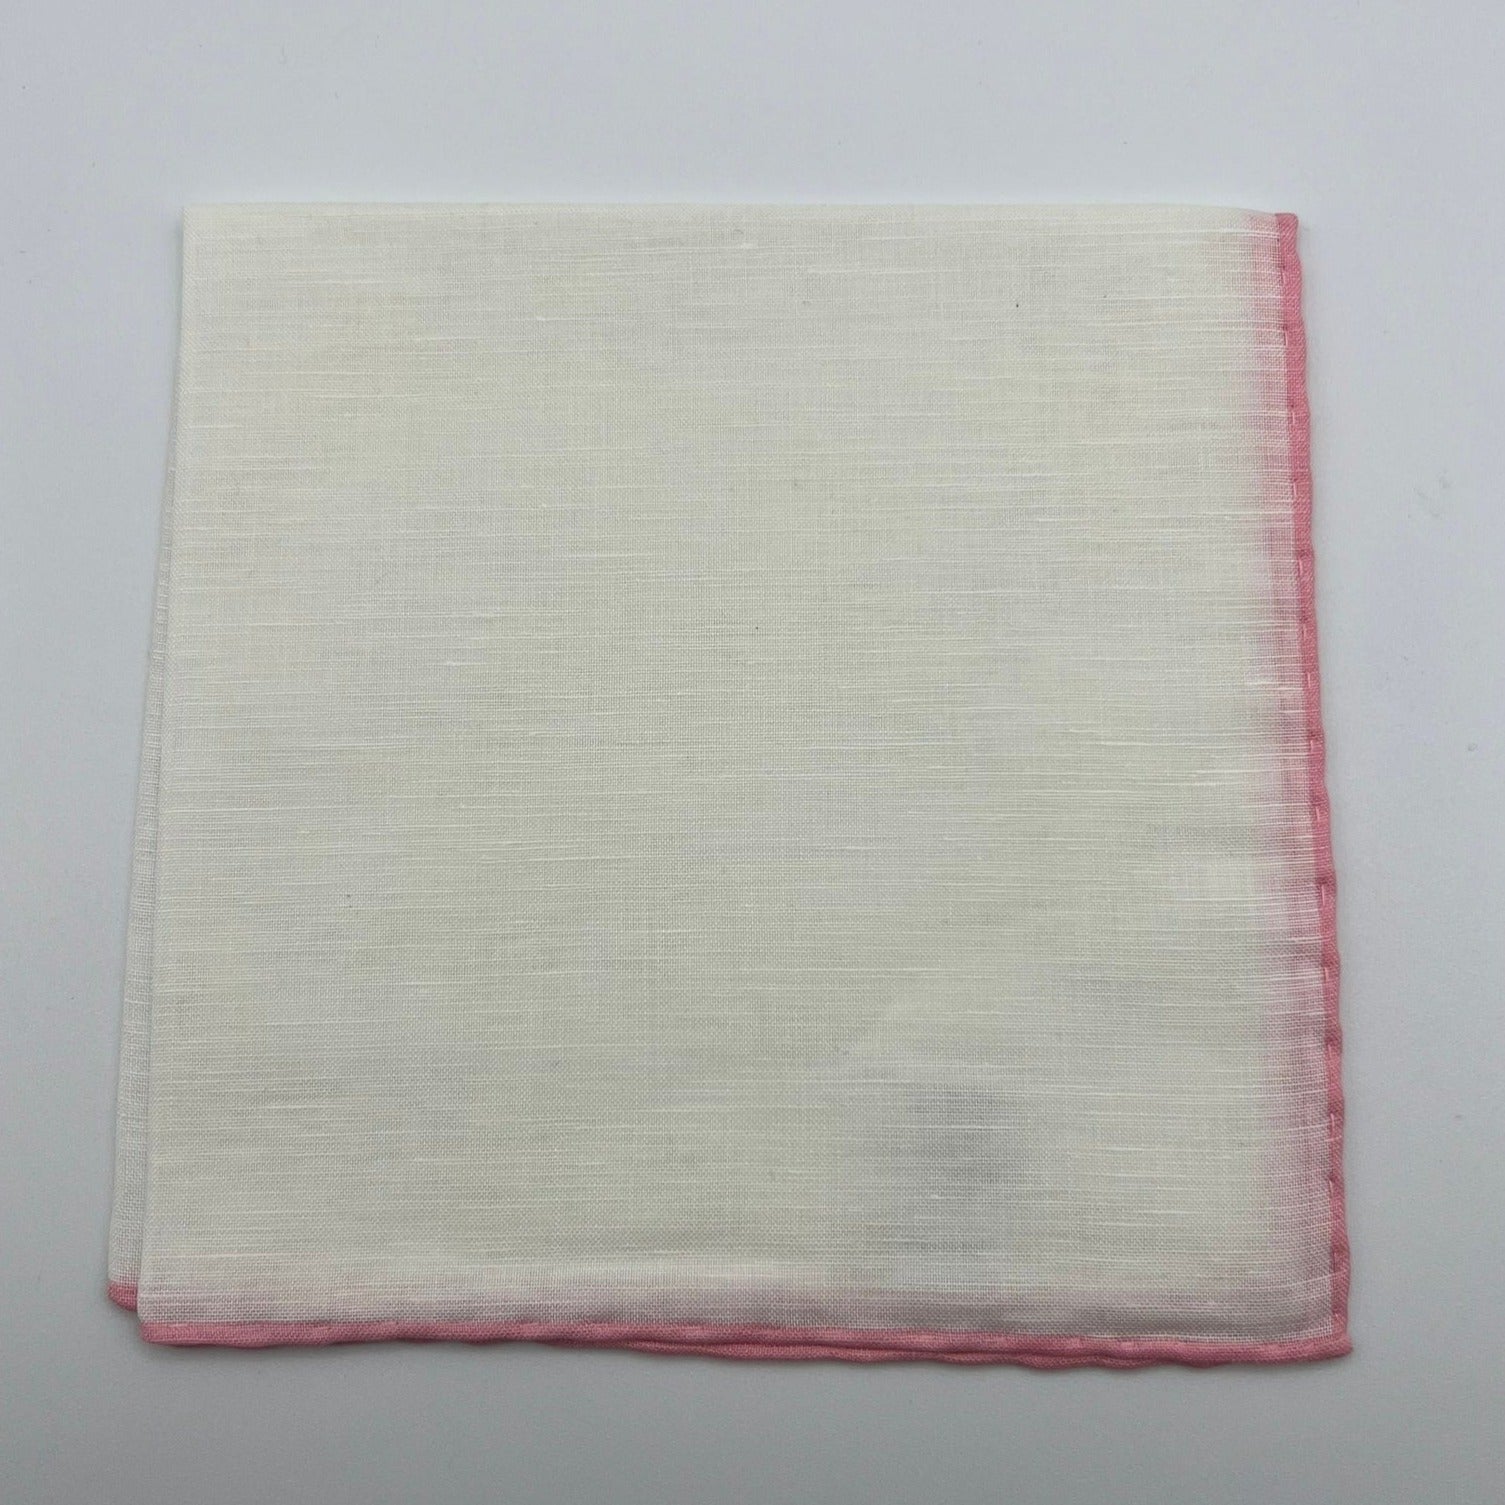 Cruciani & Bella - Linen and Cotton - White and Pink - Pocket  Square # 7517